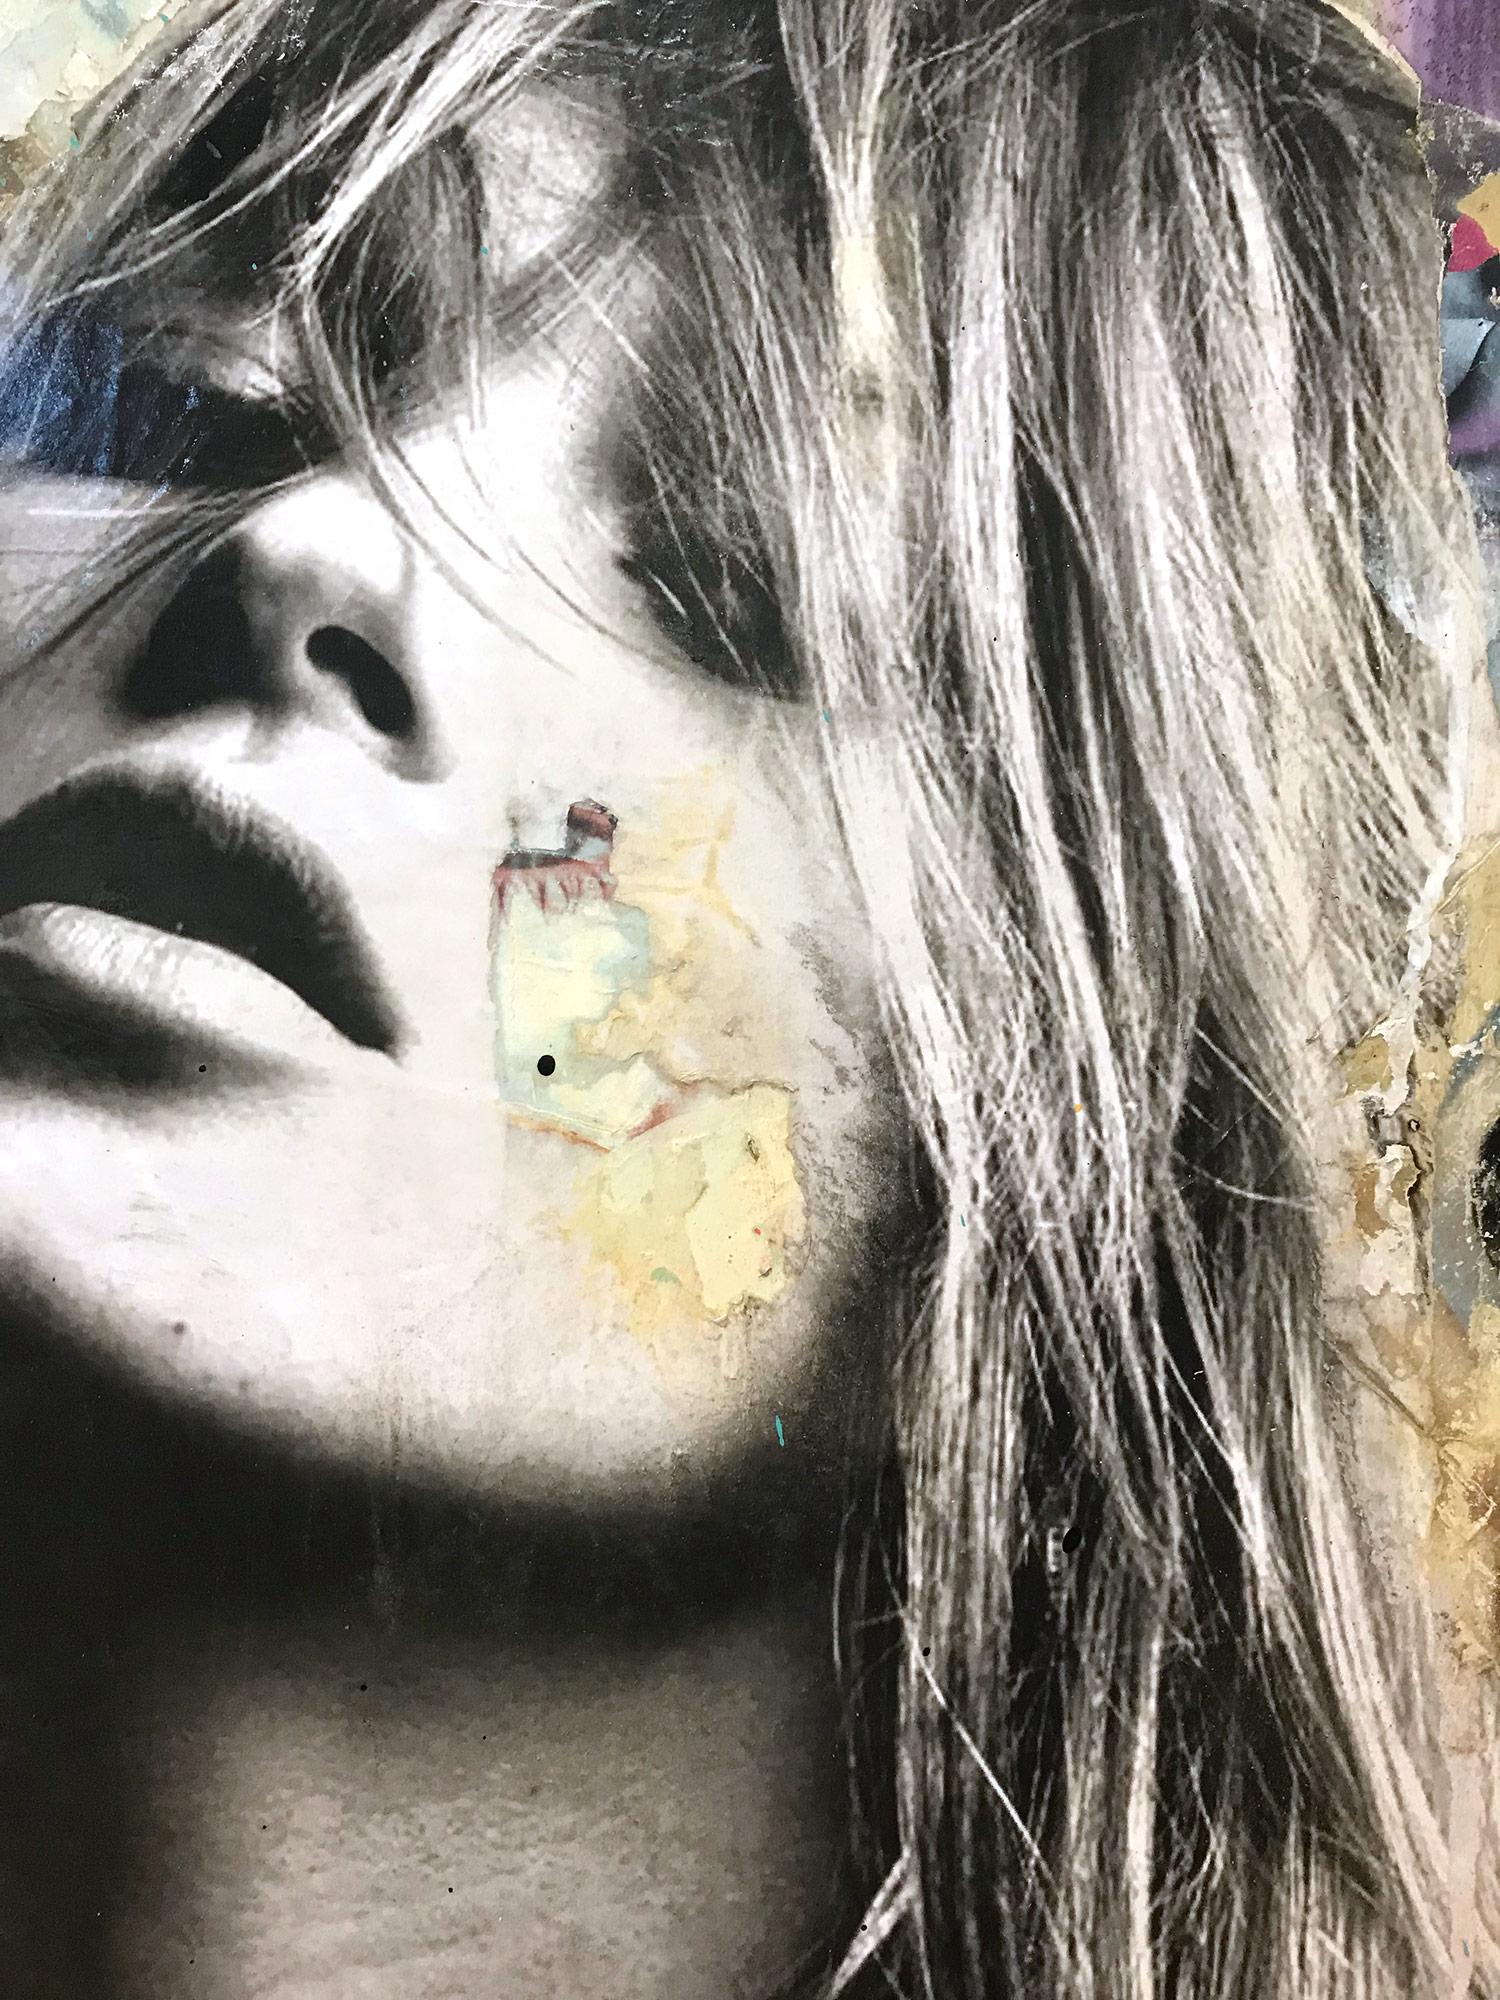 This piece depicts famous English model Kate Moss. Done with beautiful expressive colors and a distinctive street art design, this piece pops with energy and romantic beauty. Its composition and bold collage make a wonderful statement and have an